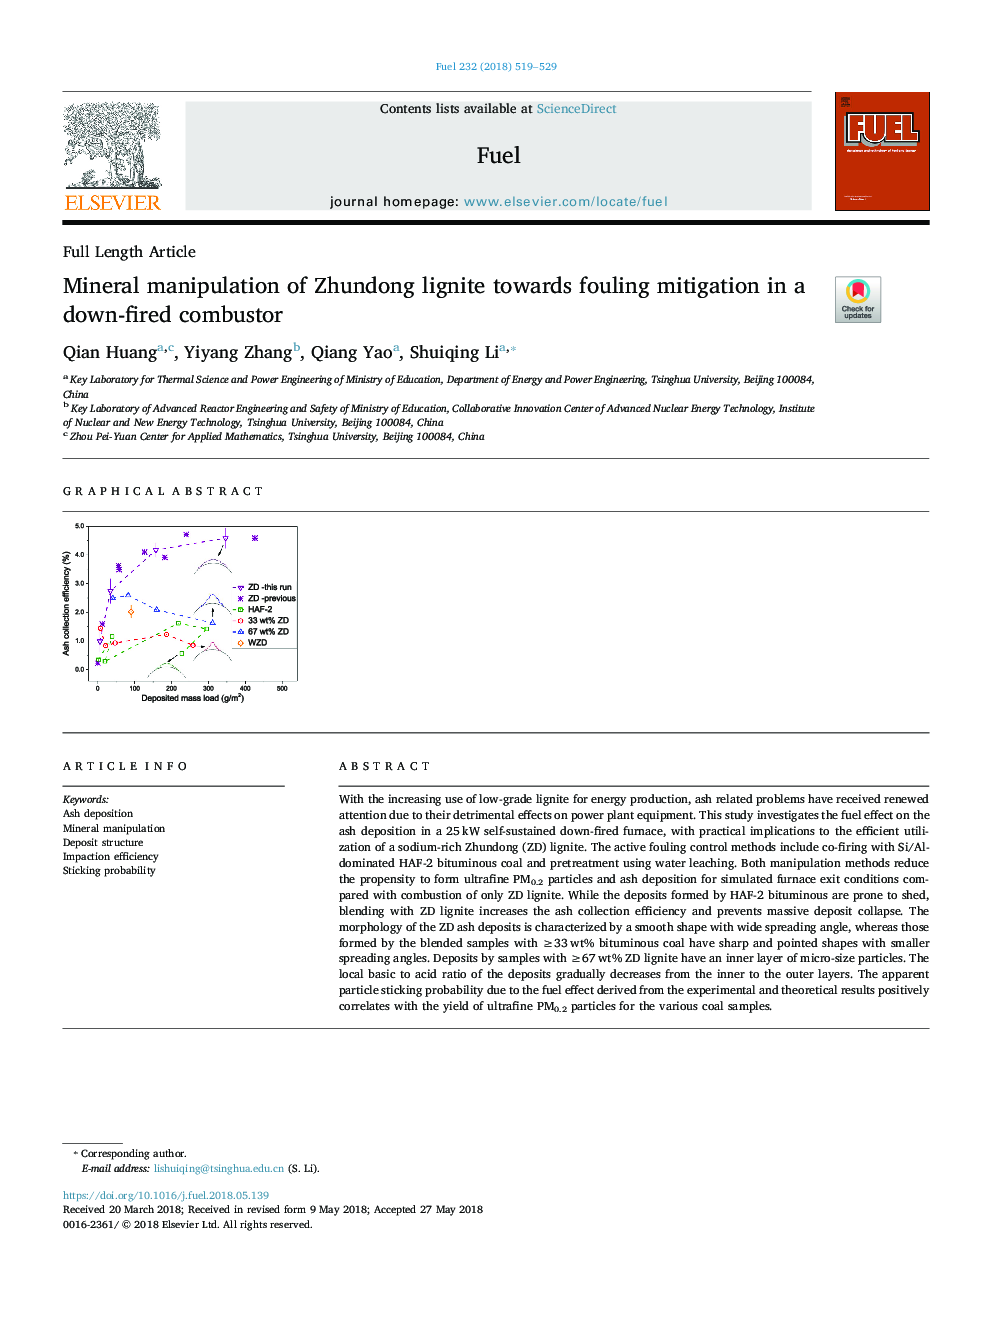 Mineral manipulation of Zhundong lignite towards fouling mitigation in a down-fired combustor